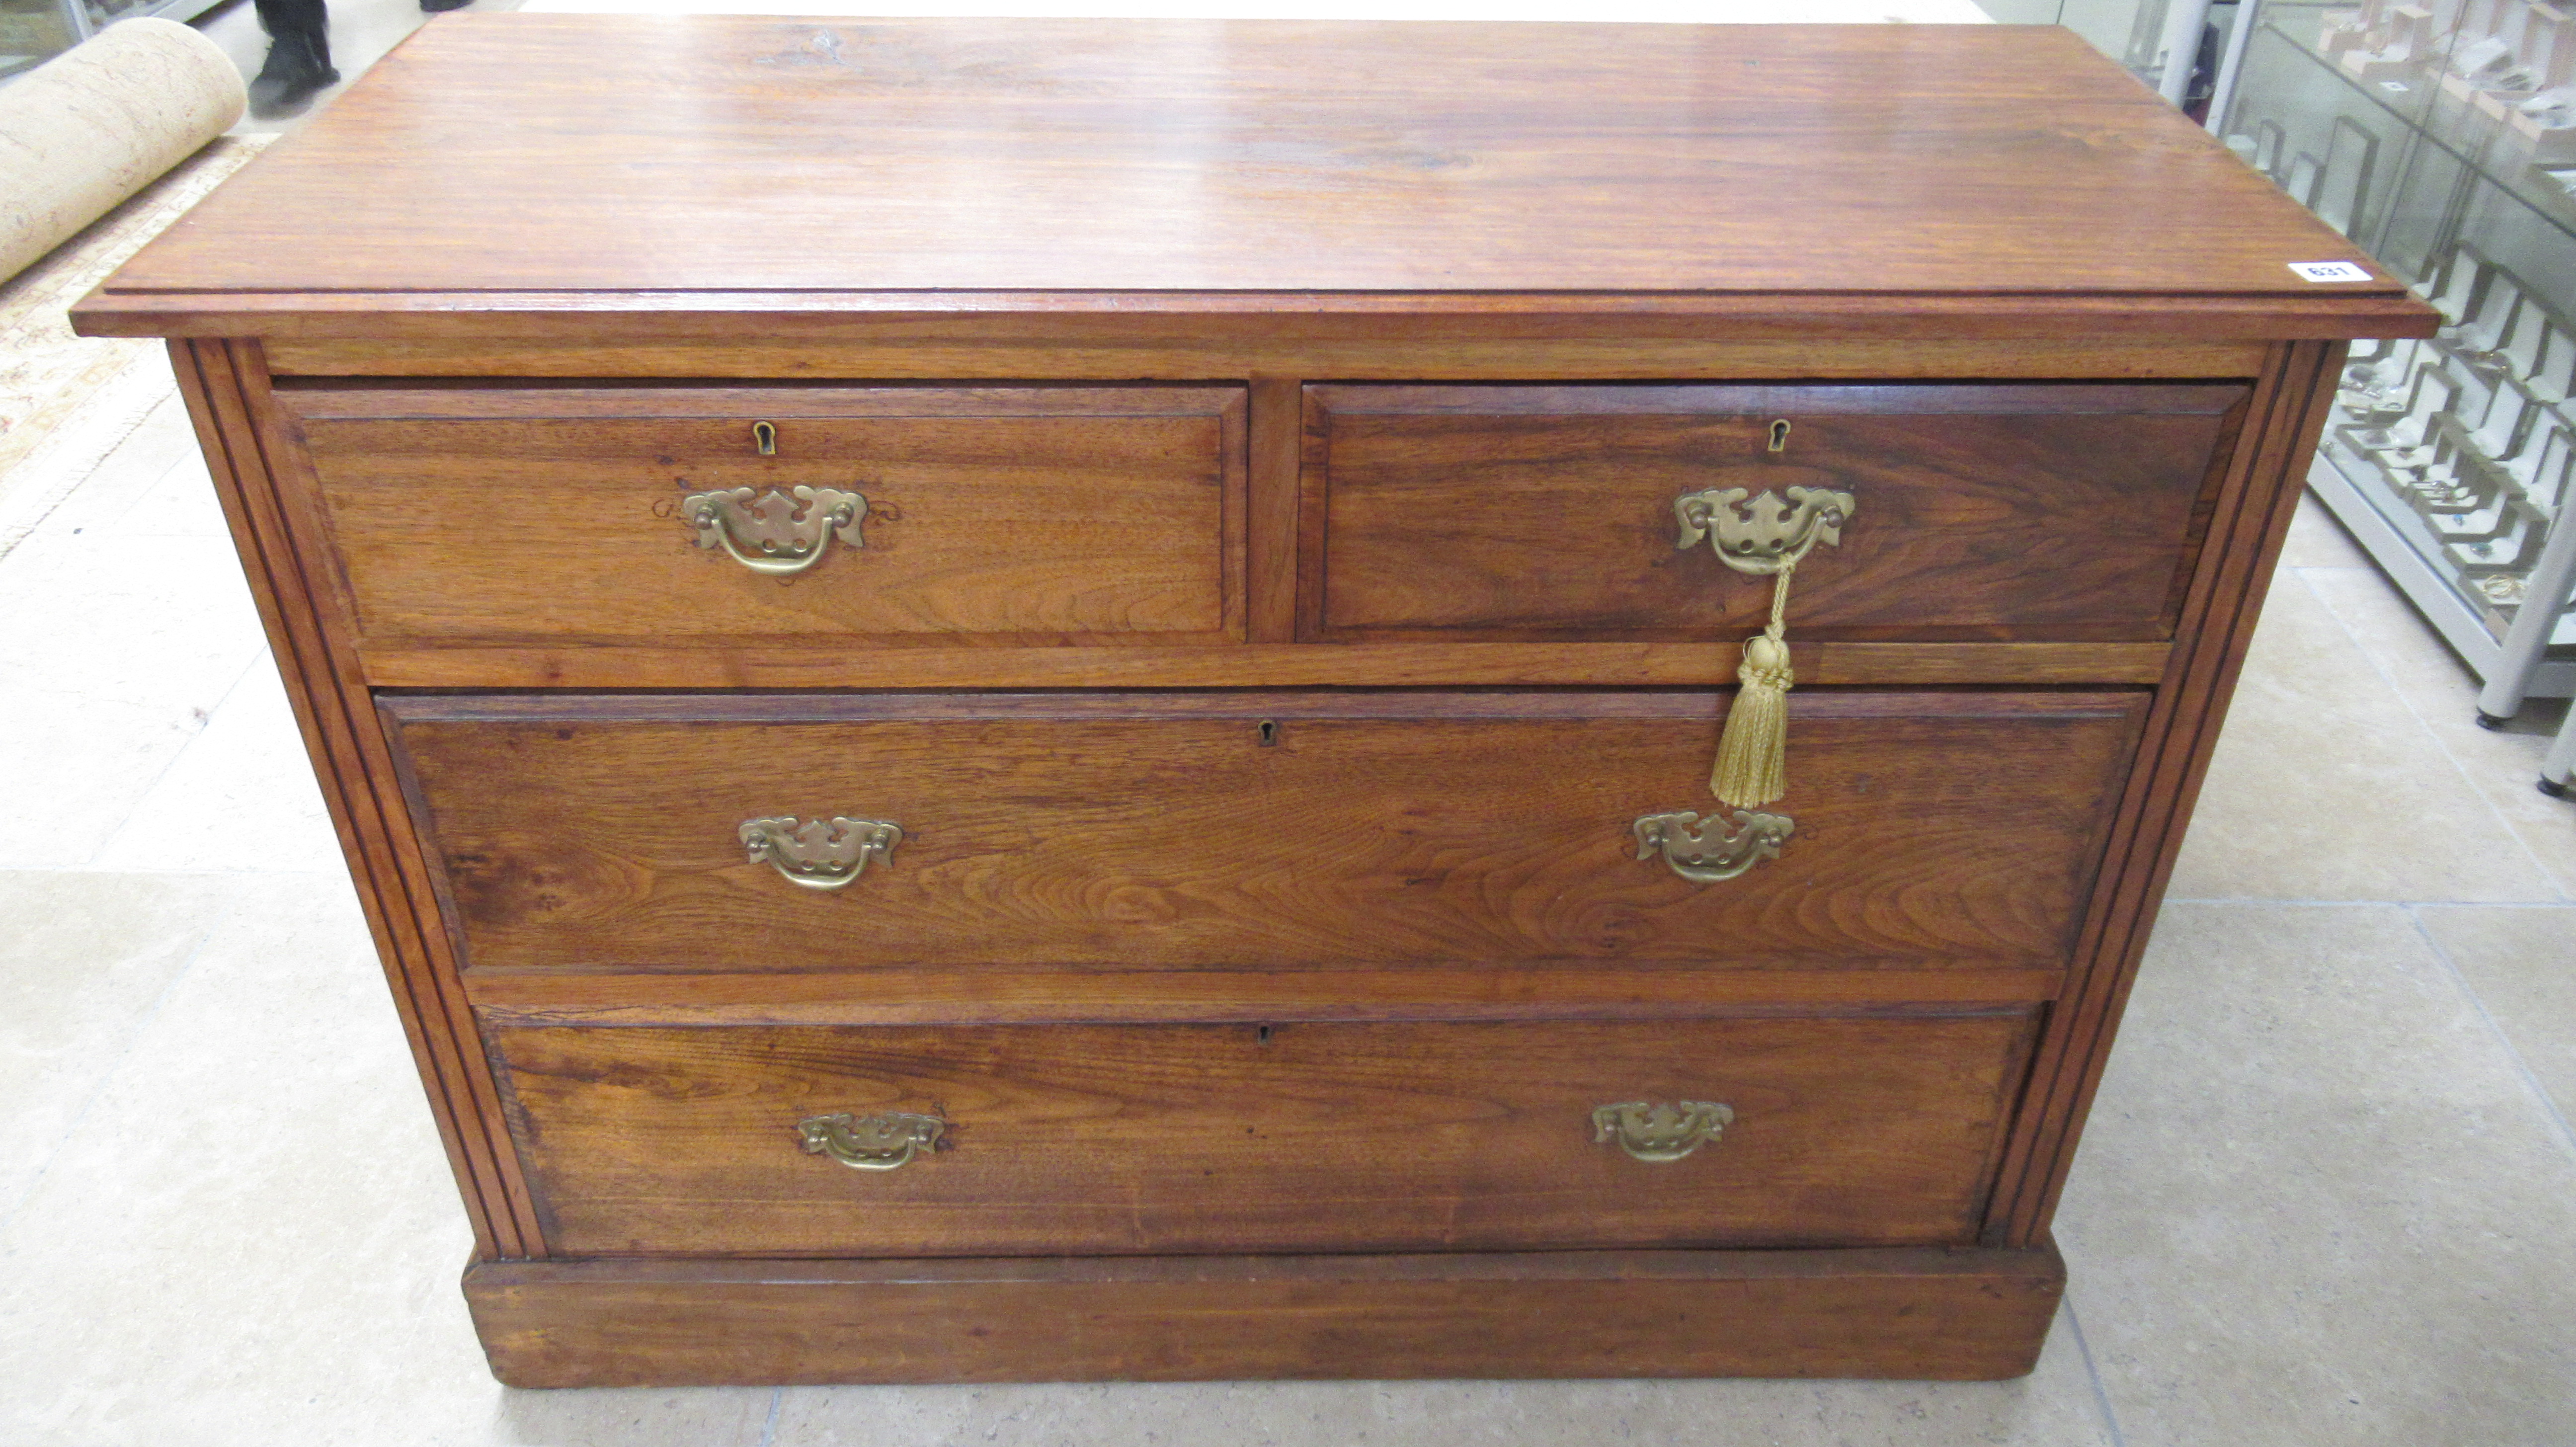 An early 20th century four drawer chest of drawers - Width 108cm x Height 80cm x Depth 47cm